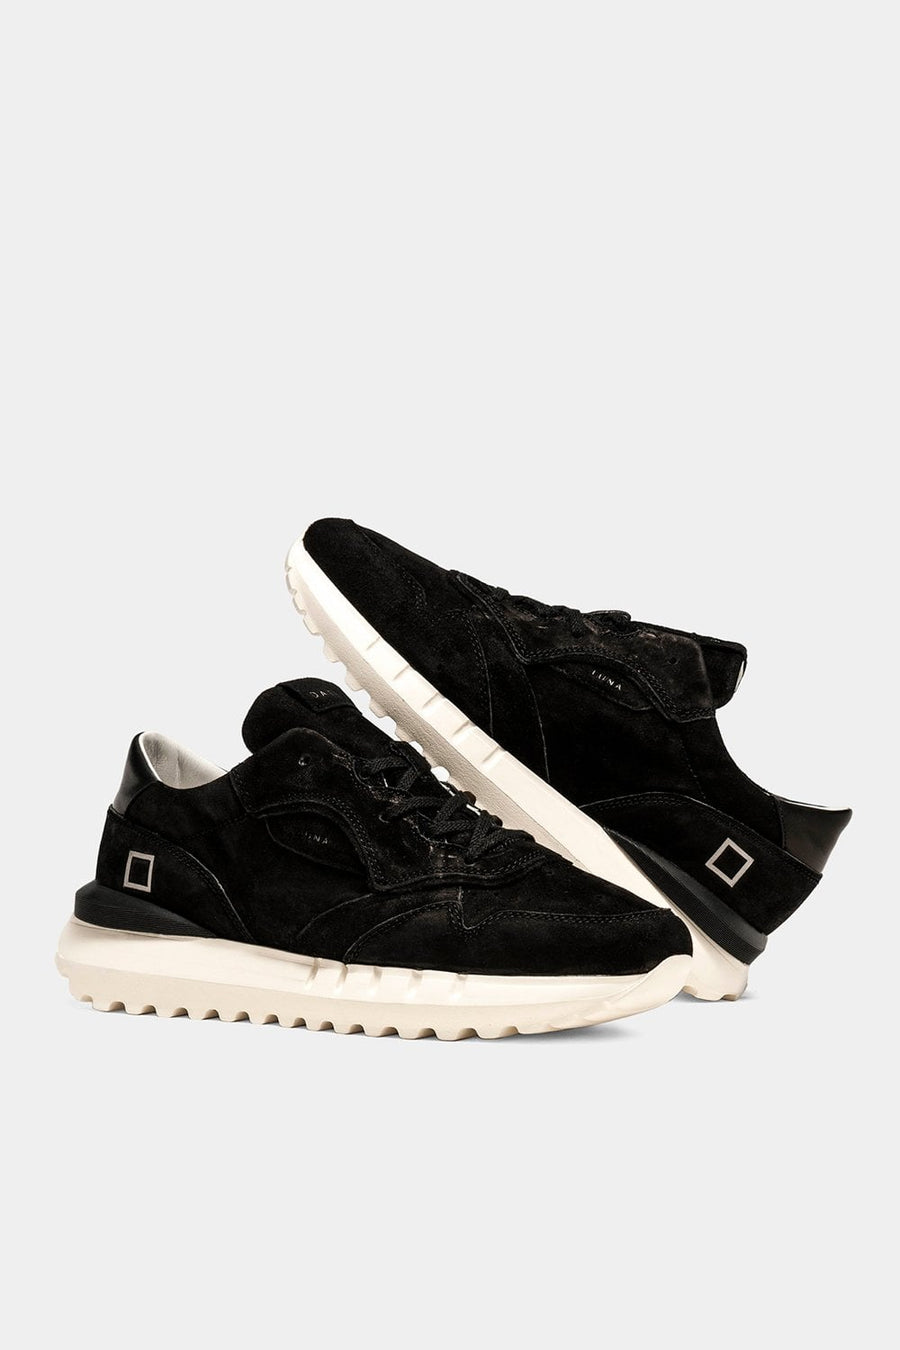 Buy the D.AT.E. Luna Sneaker in Stone Black at Intro. Spend £50 for free UK delivery. Official stockists. We ship worldwide.